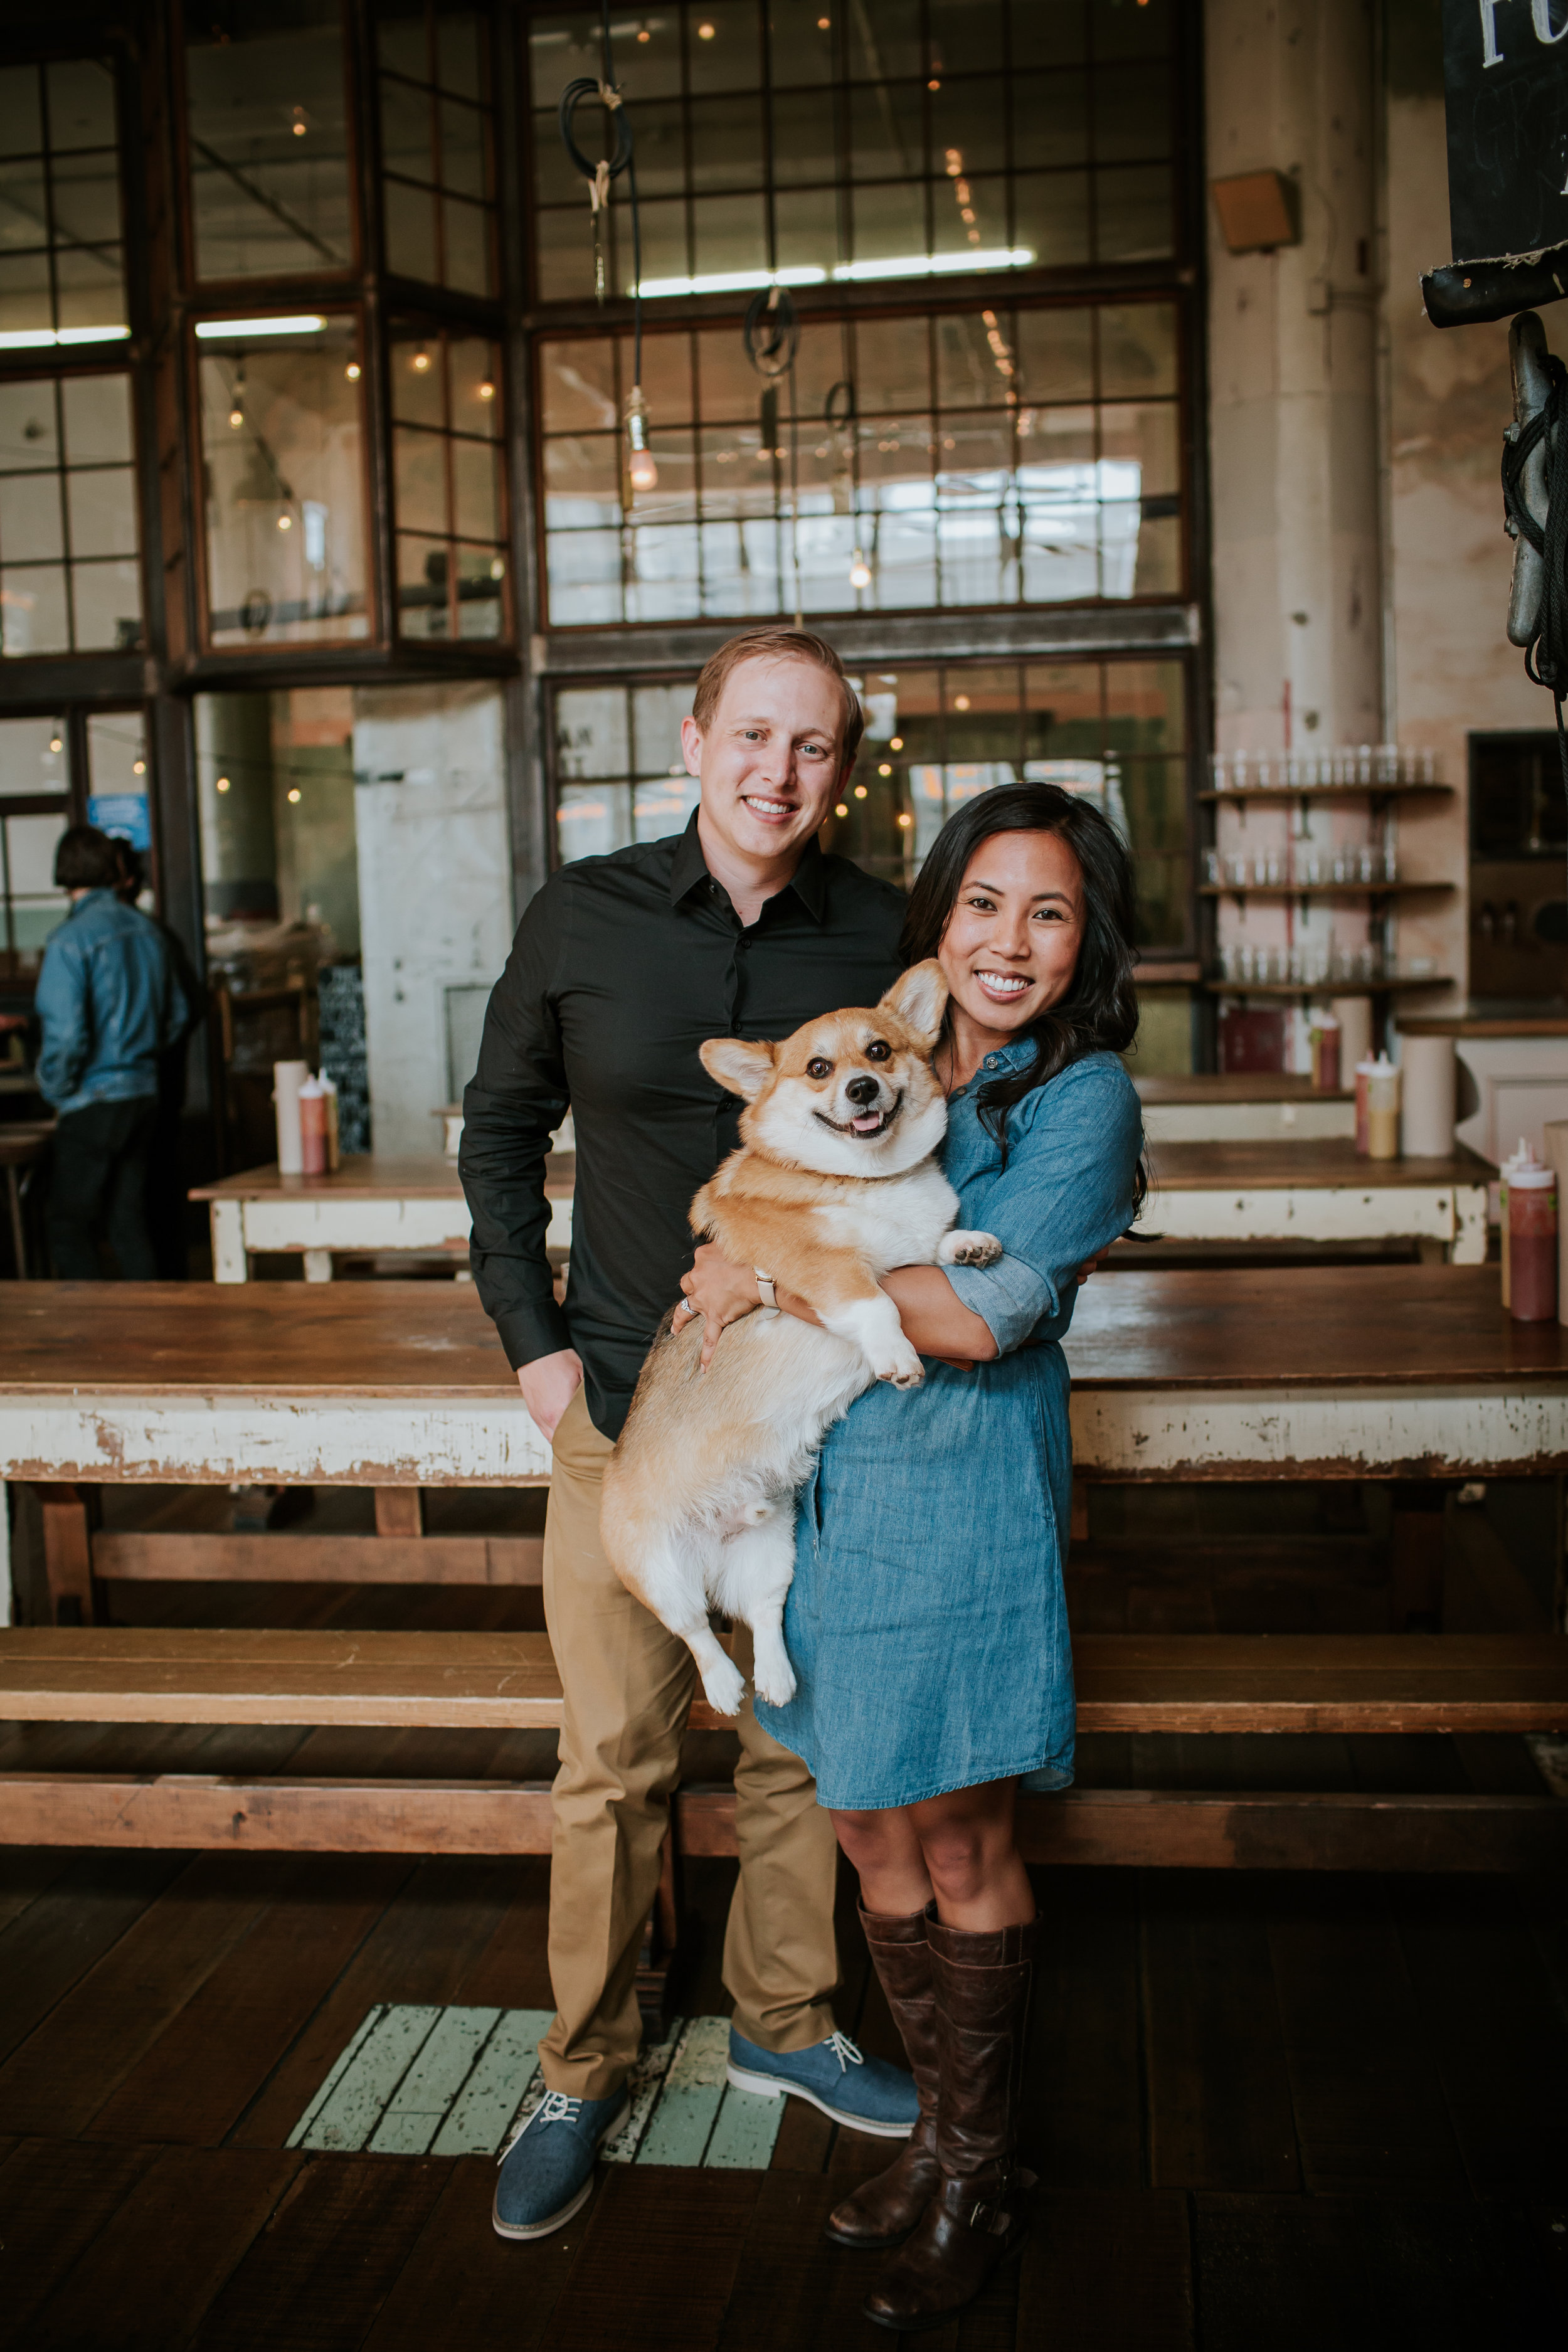 Penney and Chad San Francisco Engagament Session Brewery Mission Dolores_-12.jpg